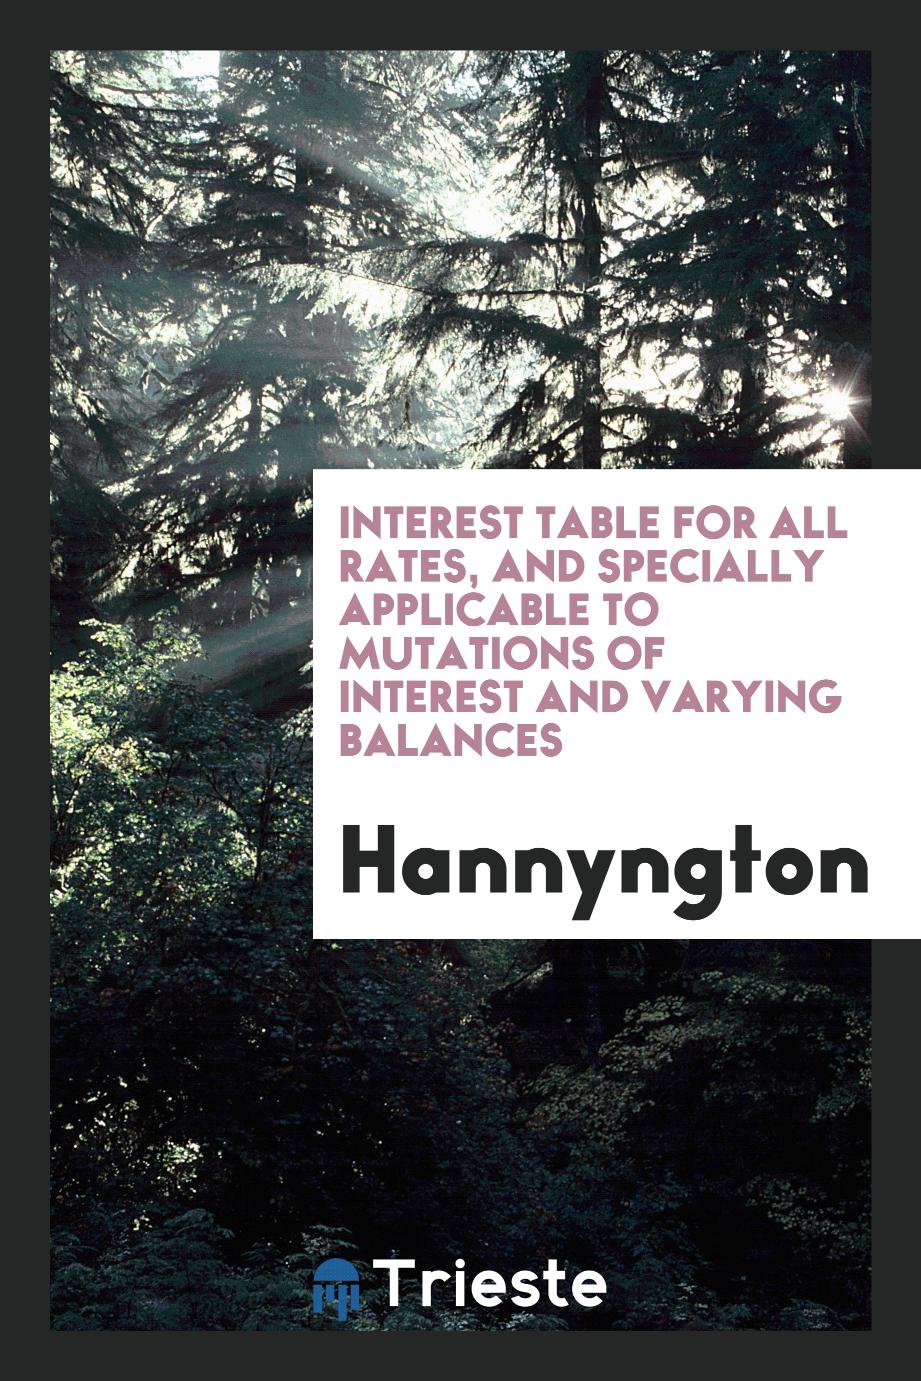 Interest table for all rates, and specially applicable to mutations of interest and varying balances